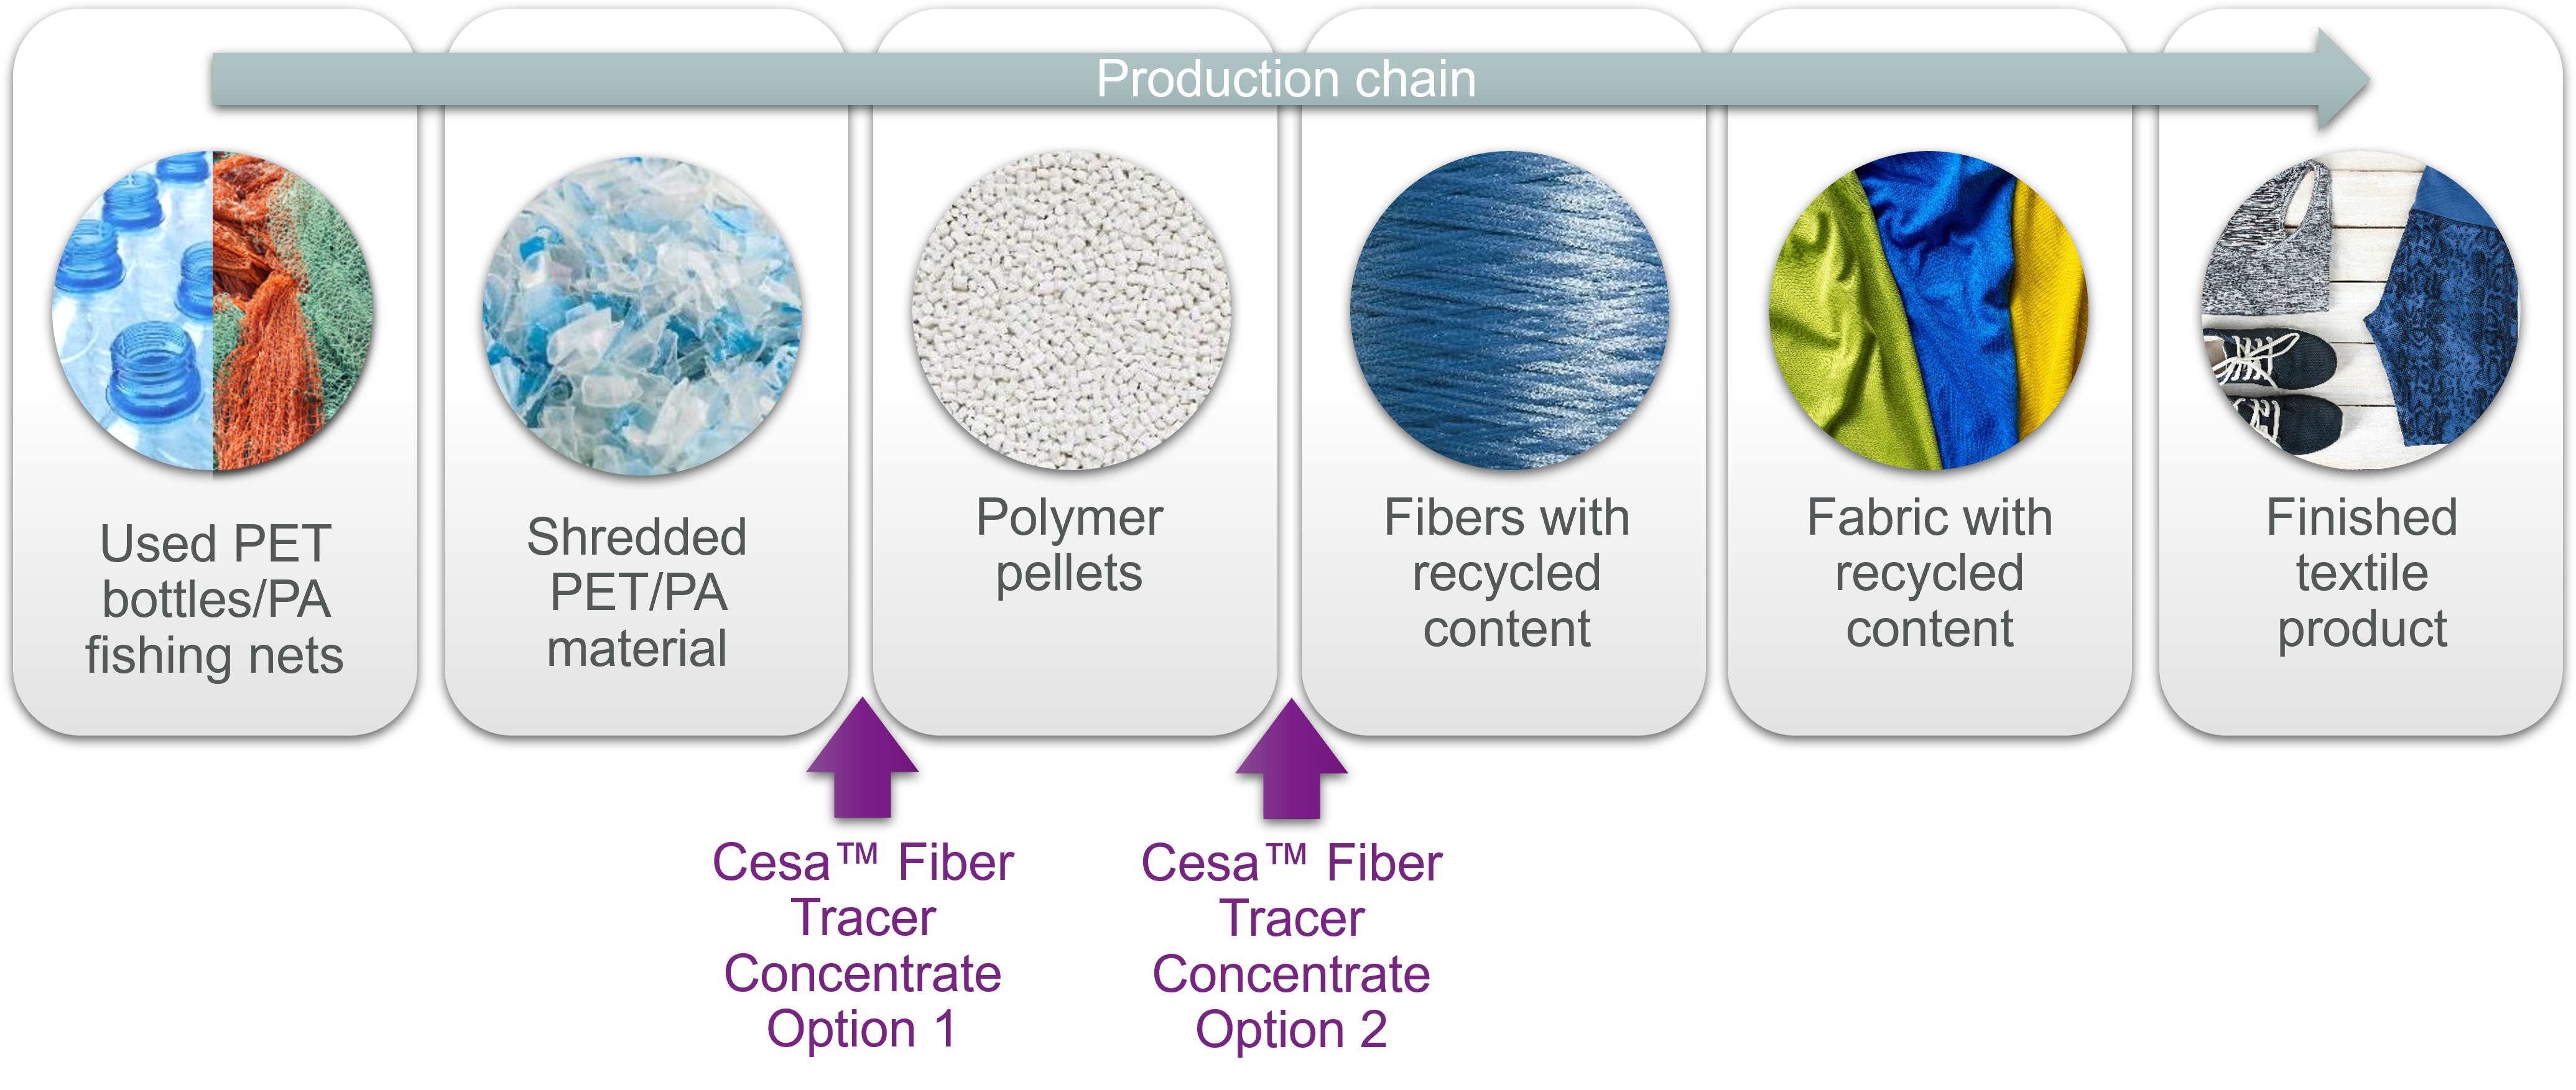 Process of producing recycled polyester fibers from R-PET